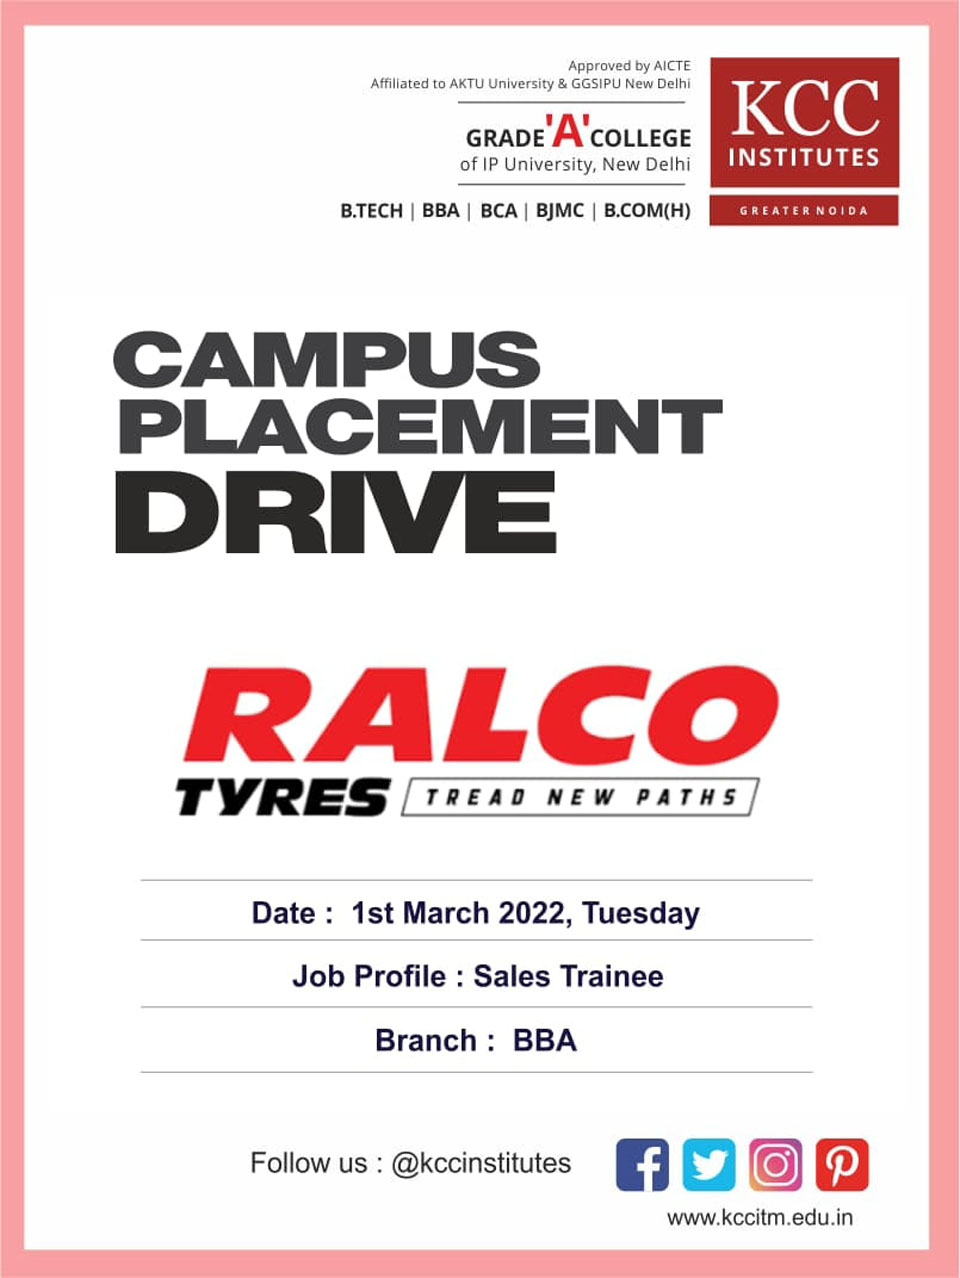 Campus Placement Drive for RALCO on 1st March 2022 (Tuesday)